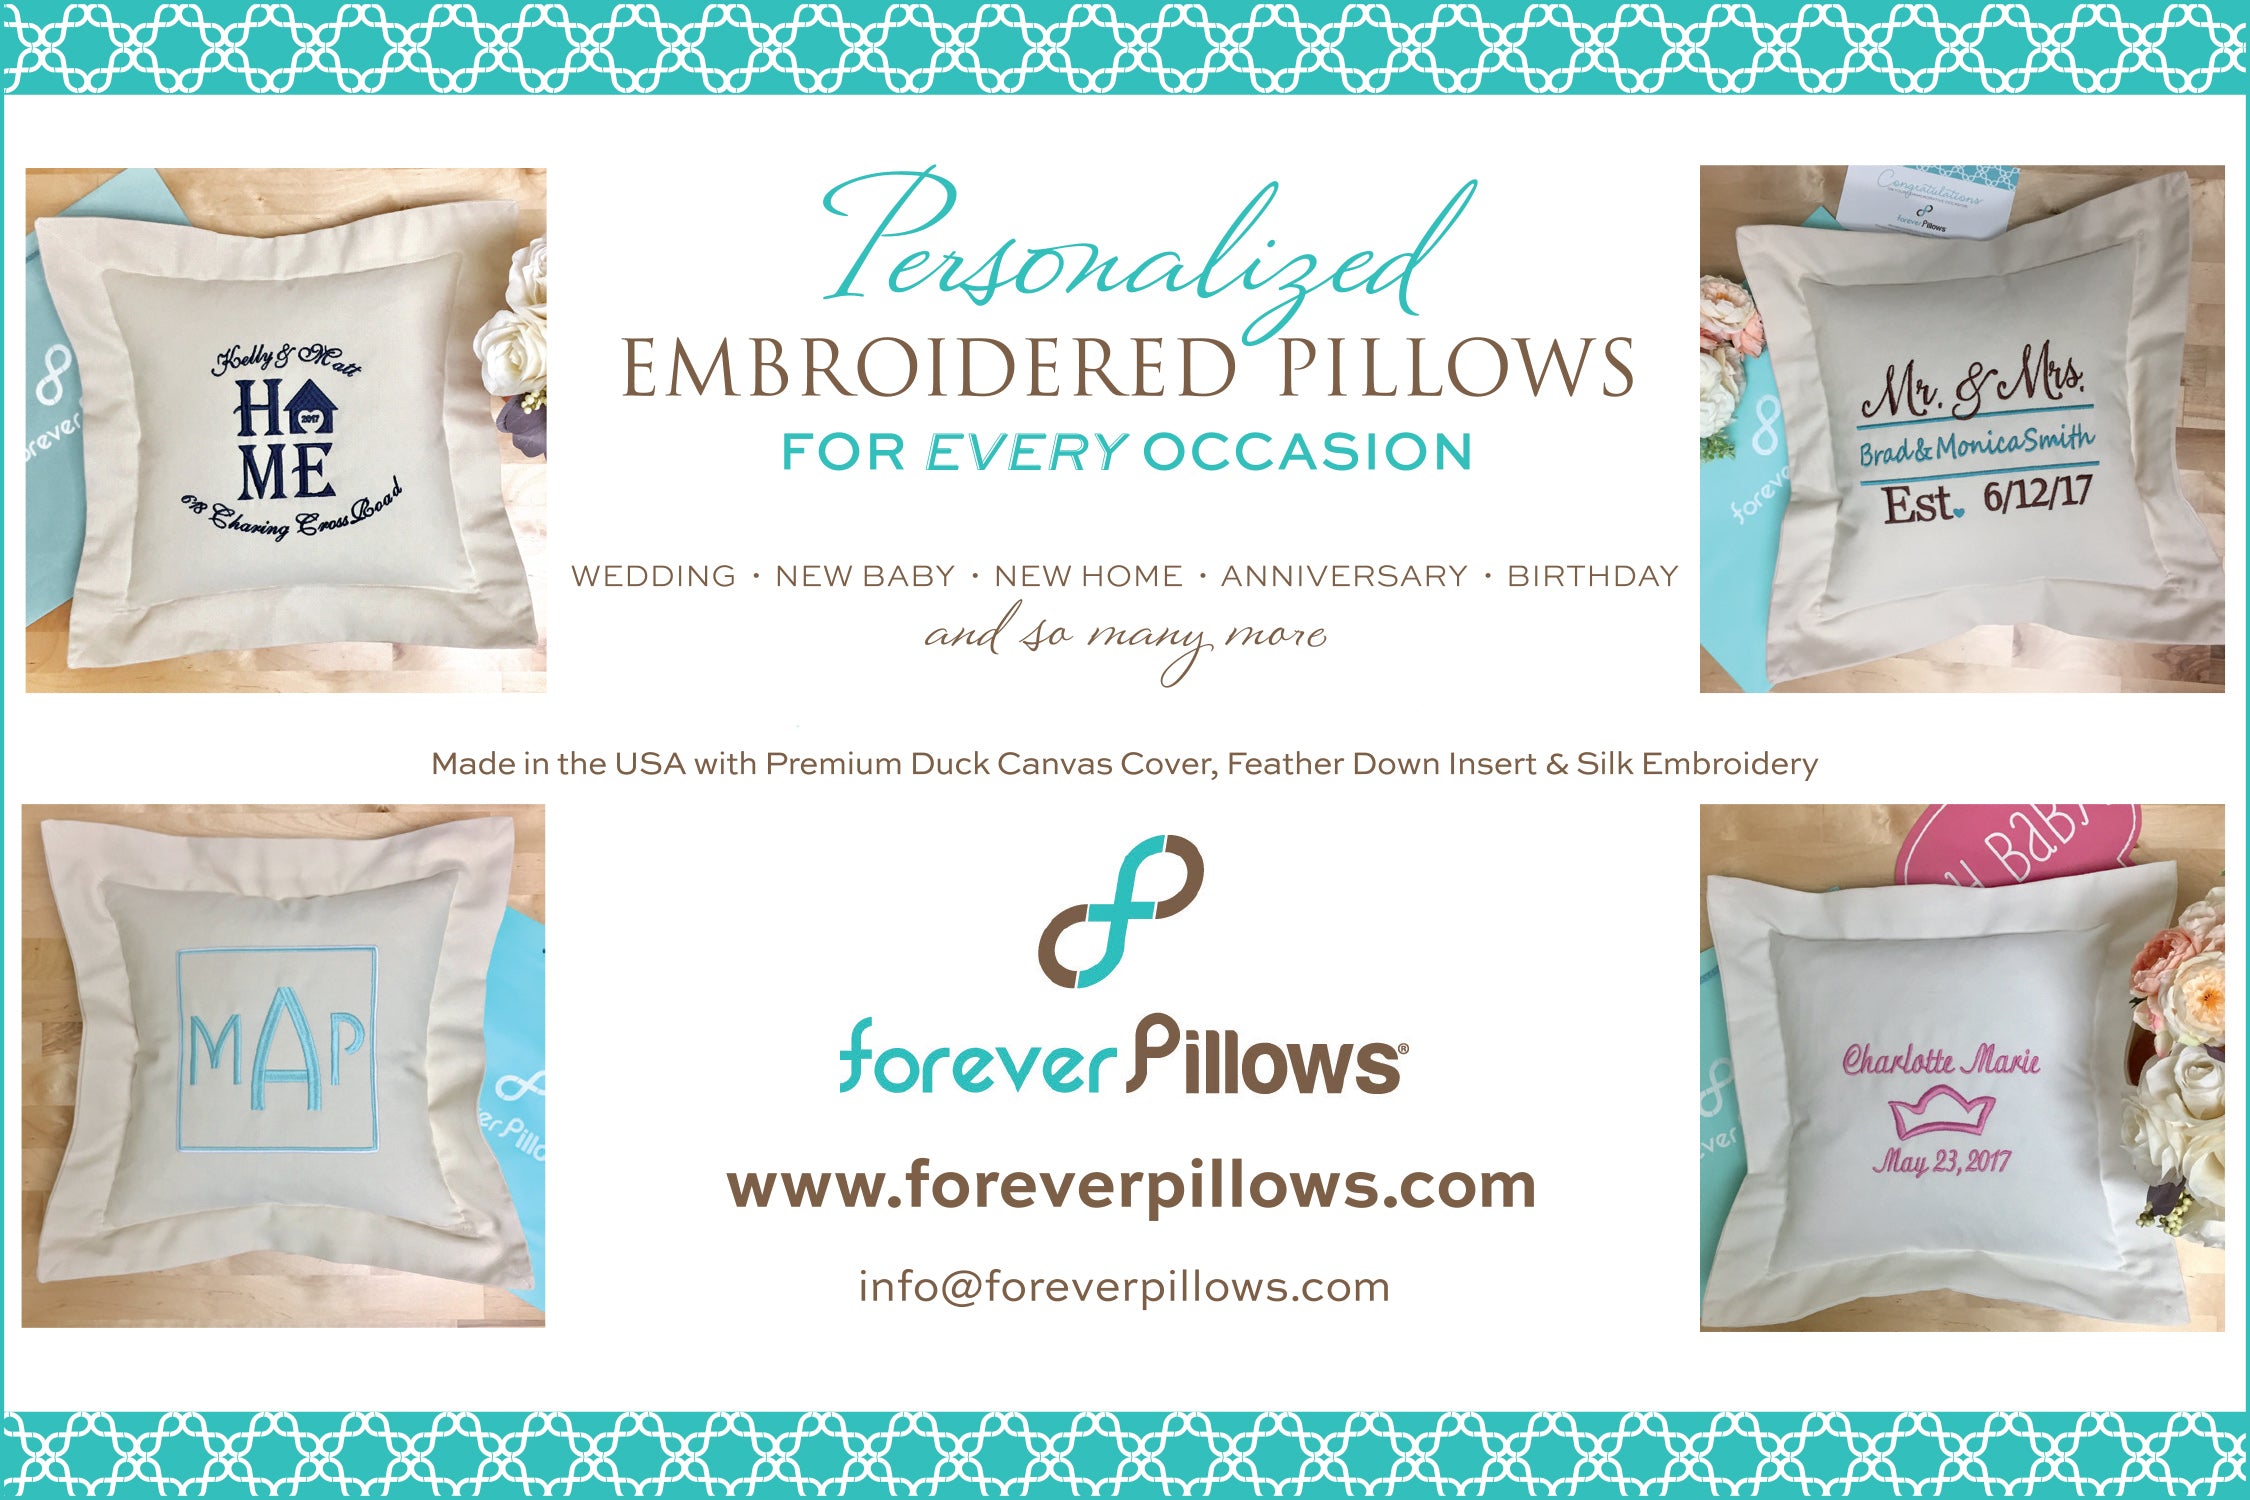 Personalized Pillows | Forever Pillows | Custom Pillows